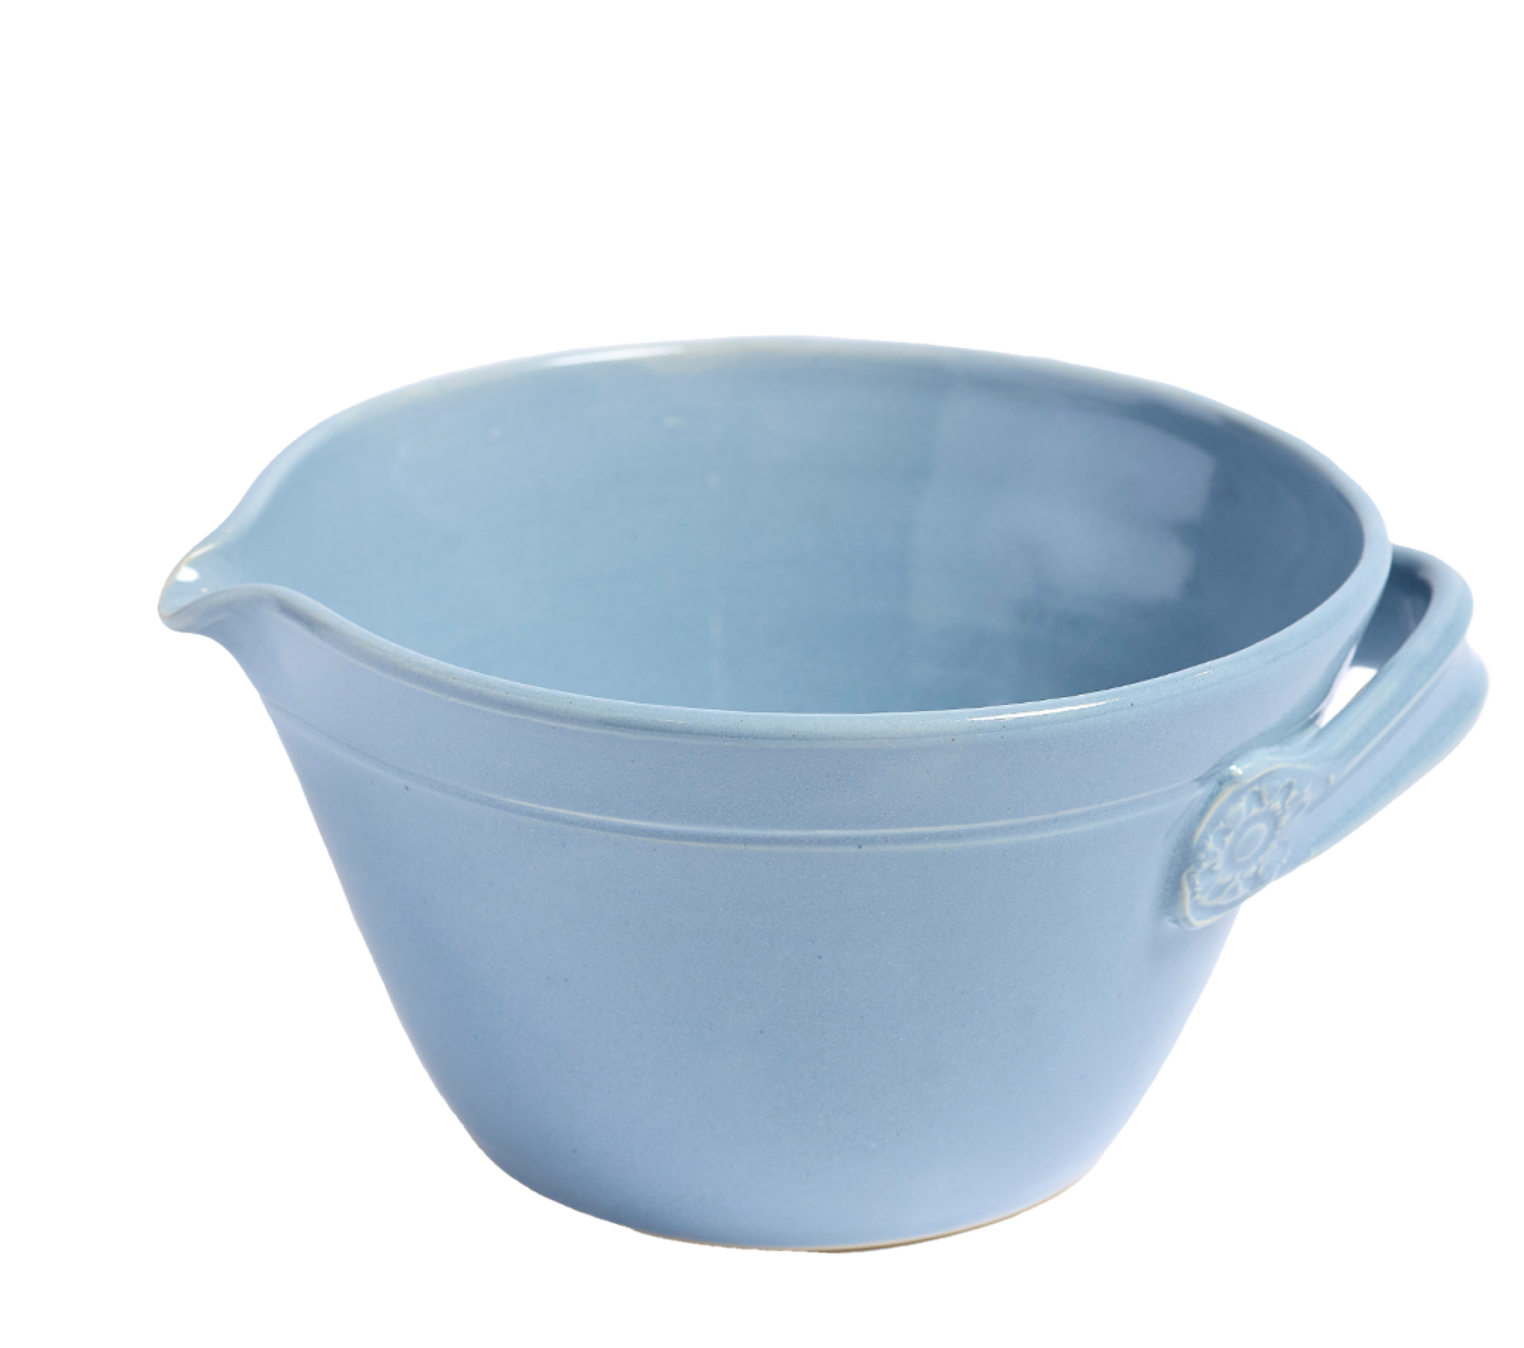 holiday baking supplies: an image of the light blue Dogwood Batter Bowl